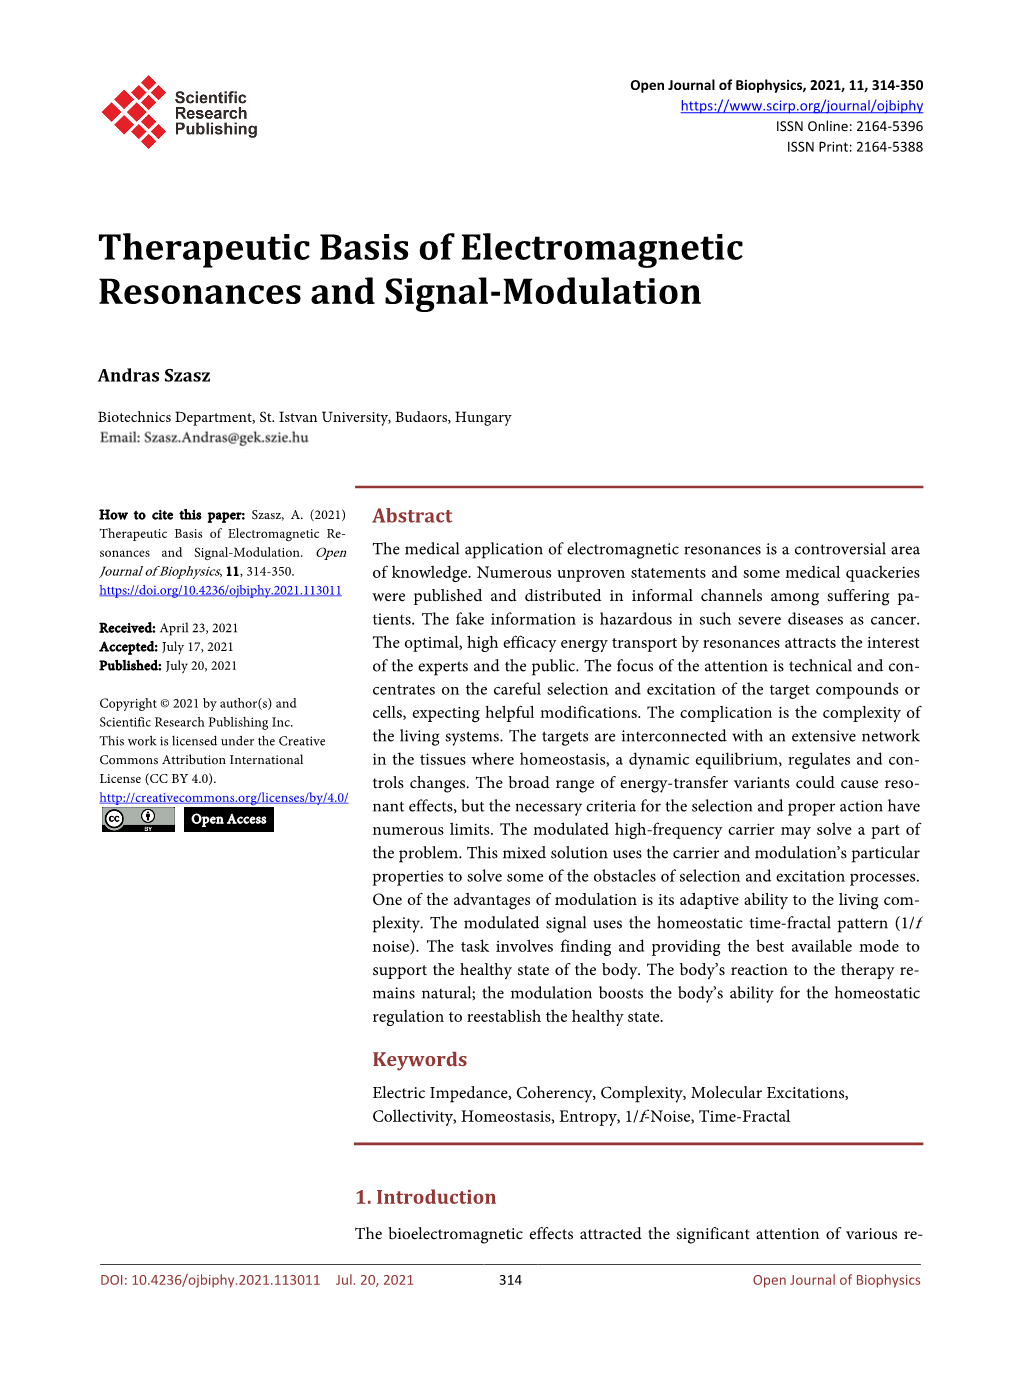 Therapeutic Basis of Electromagnetic Resonances and Signal-Modulation